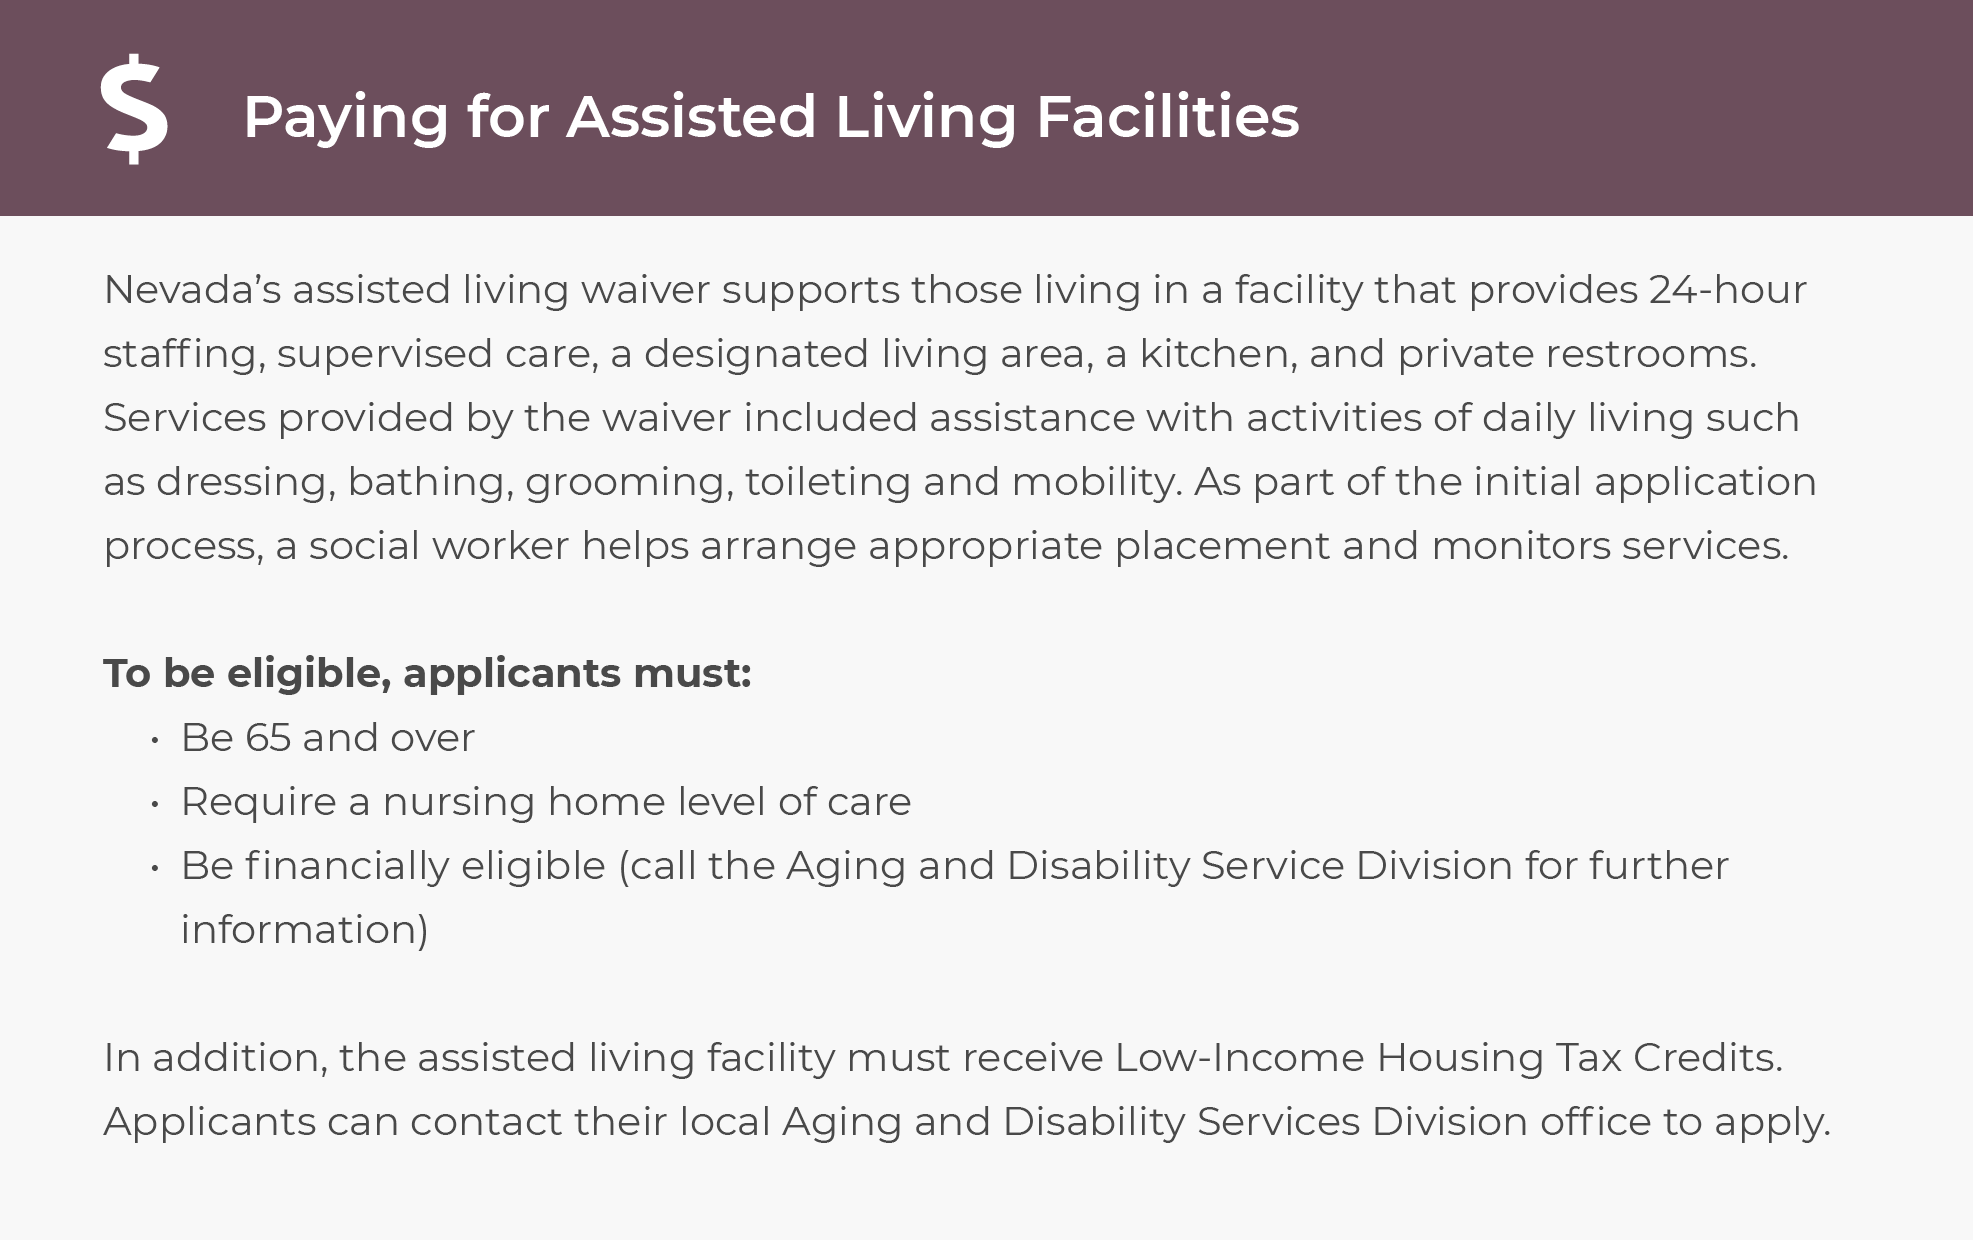 Paying for assisted living facilities in Nevada